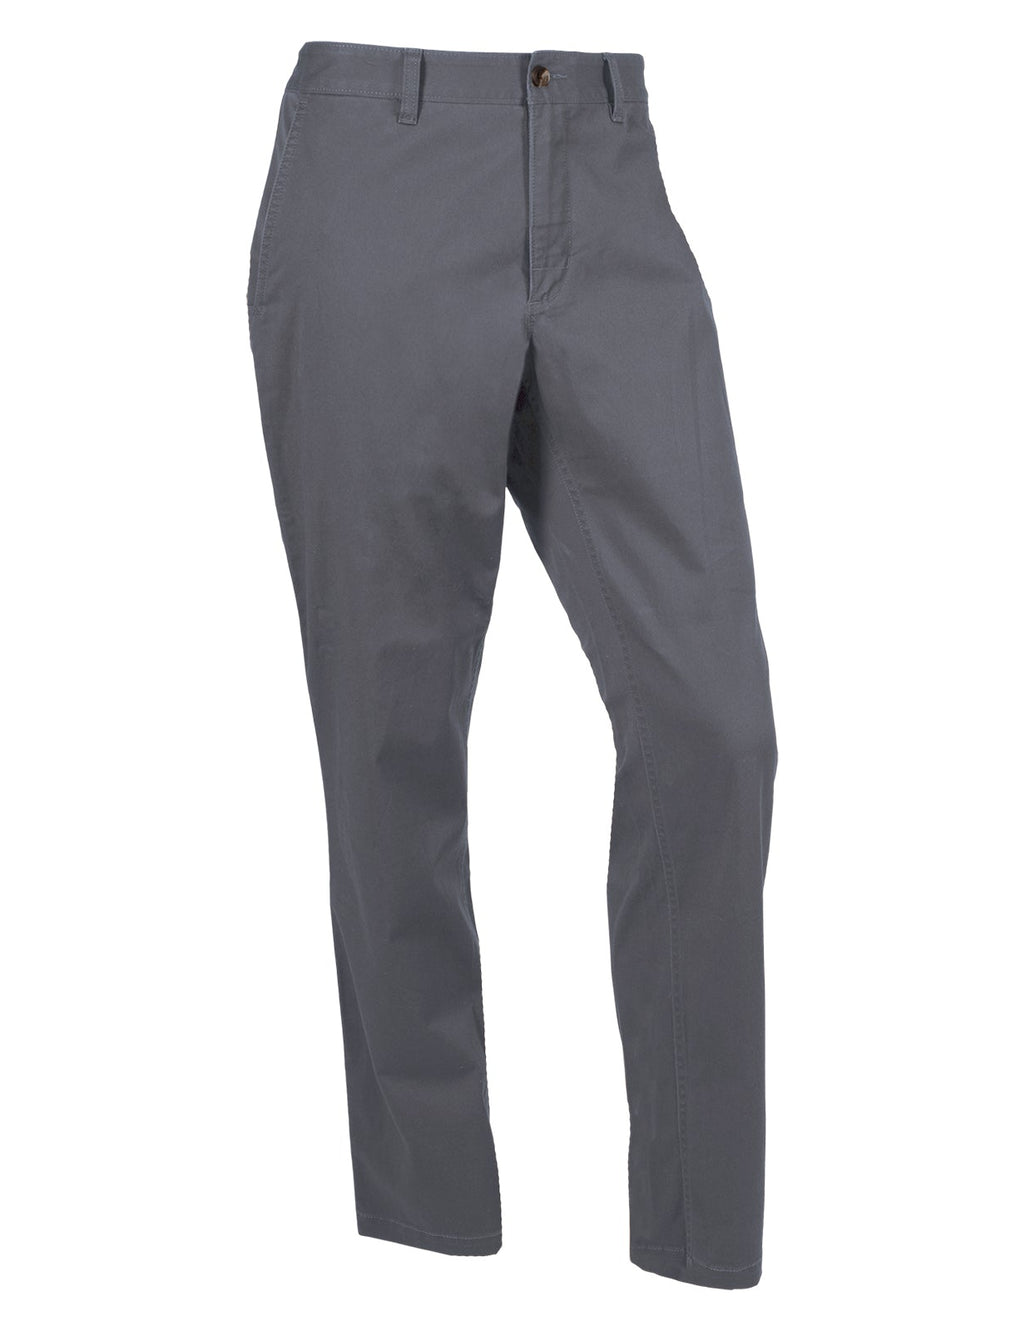 Men's Homestead Chino Pant | Relaxed Fit / Gunmetal